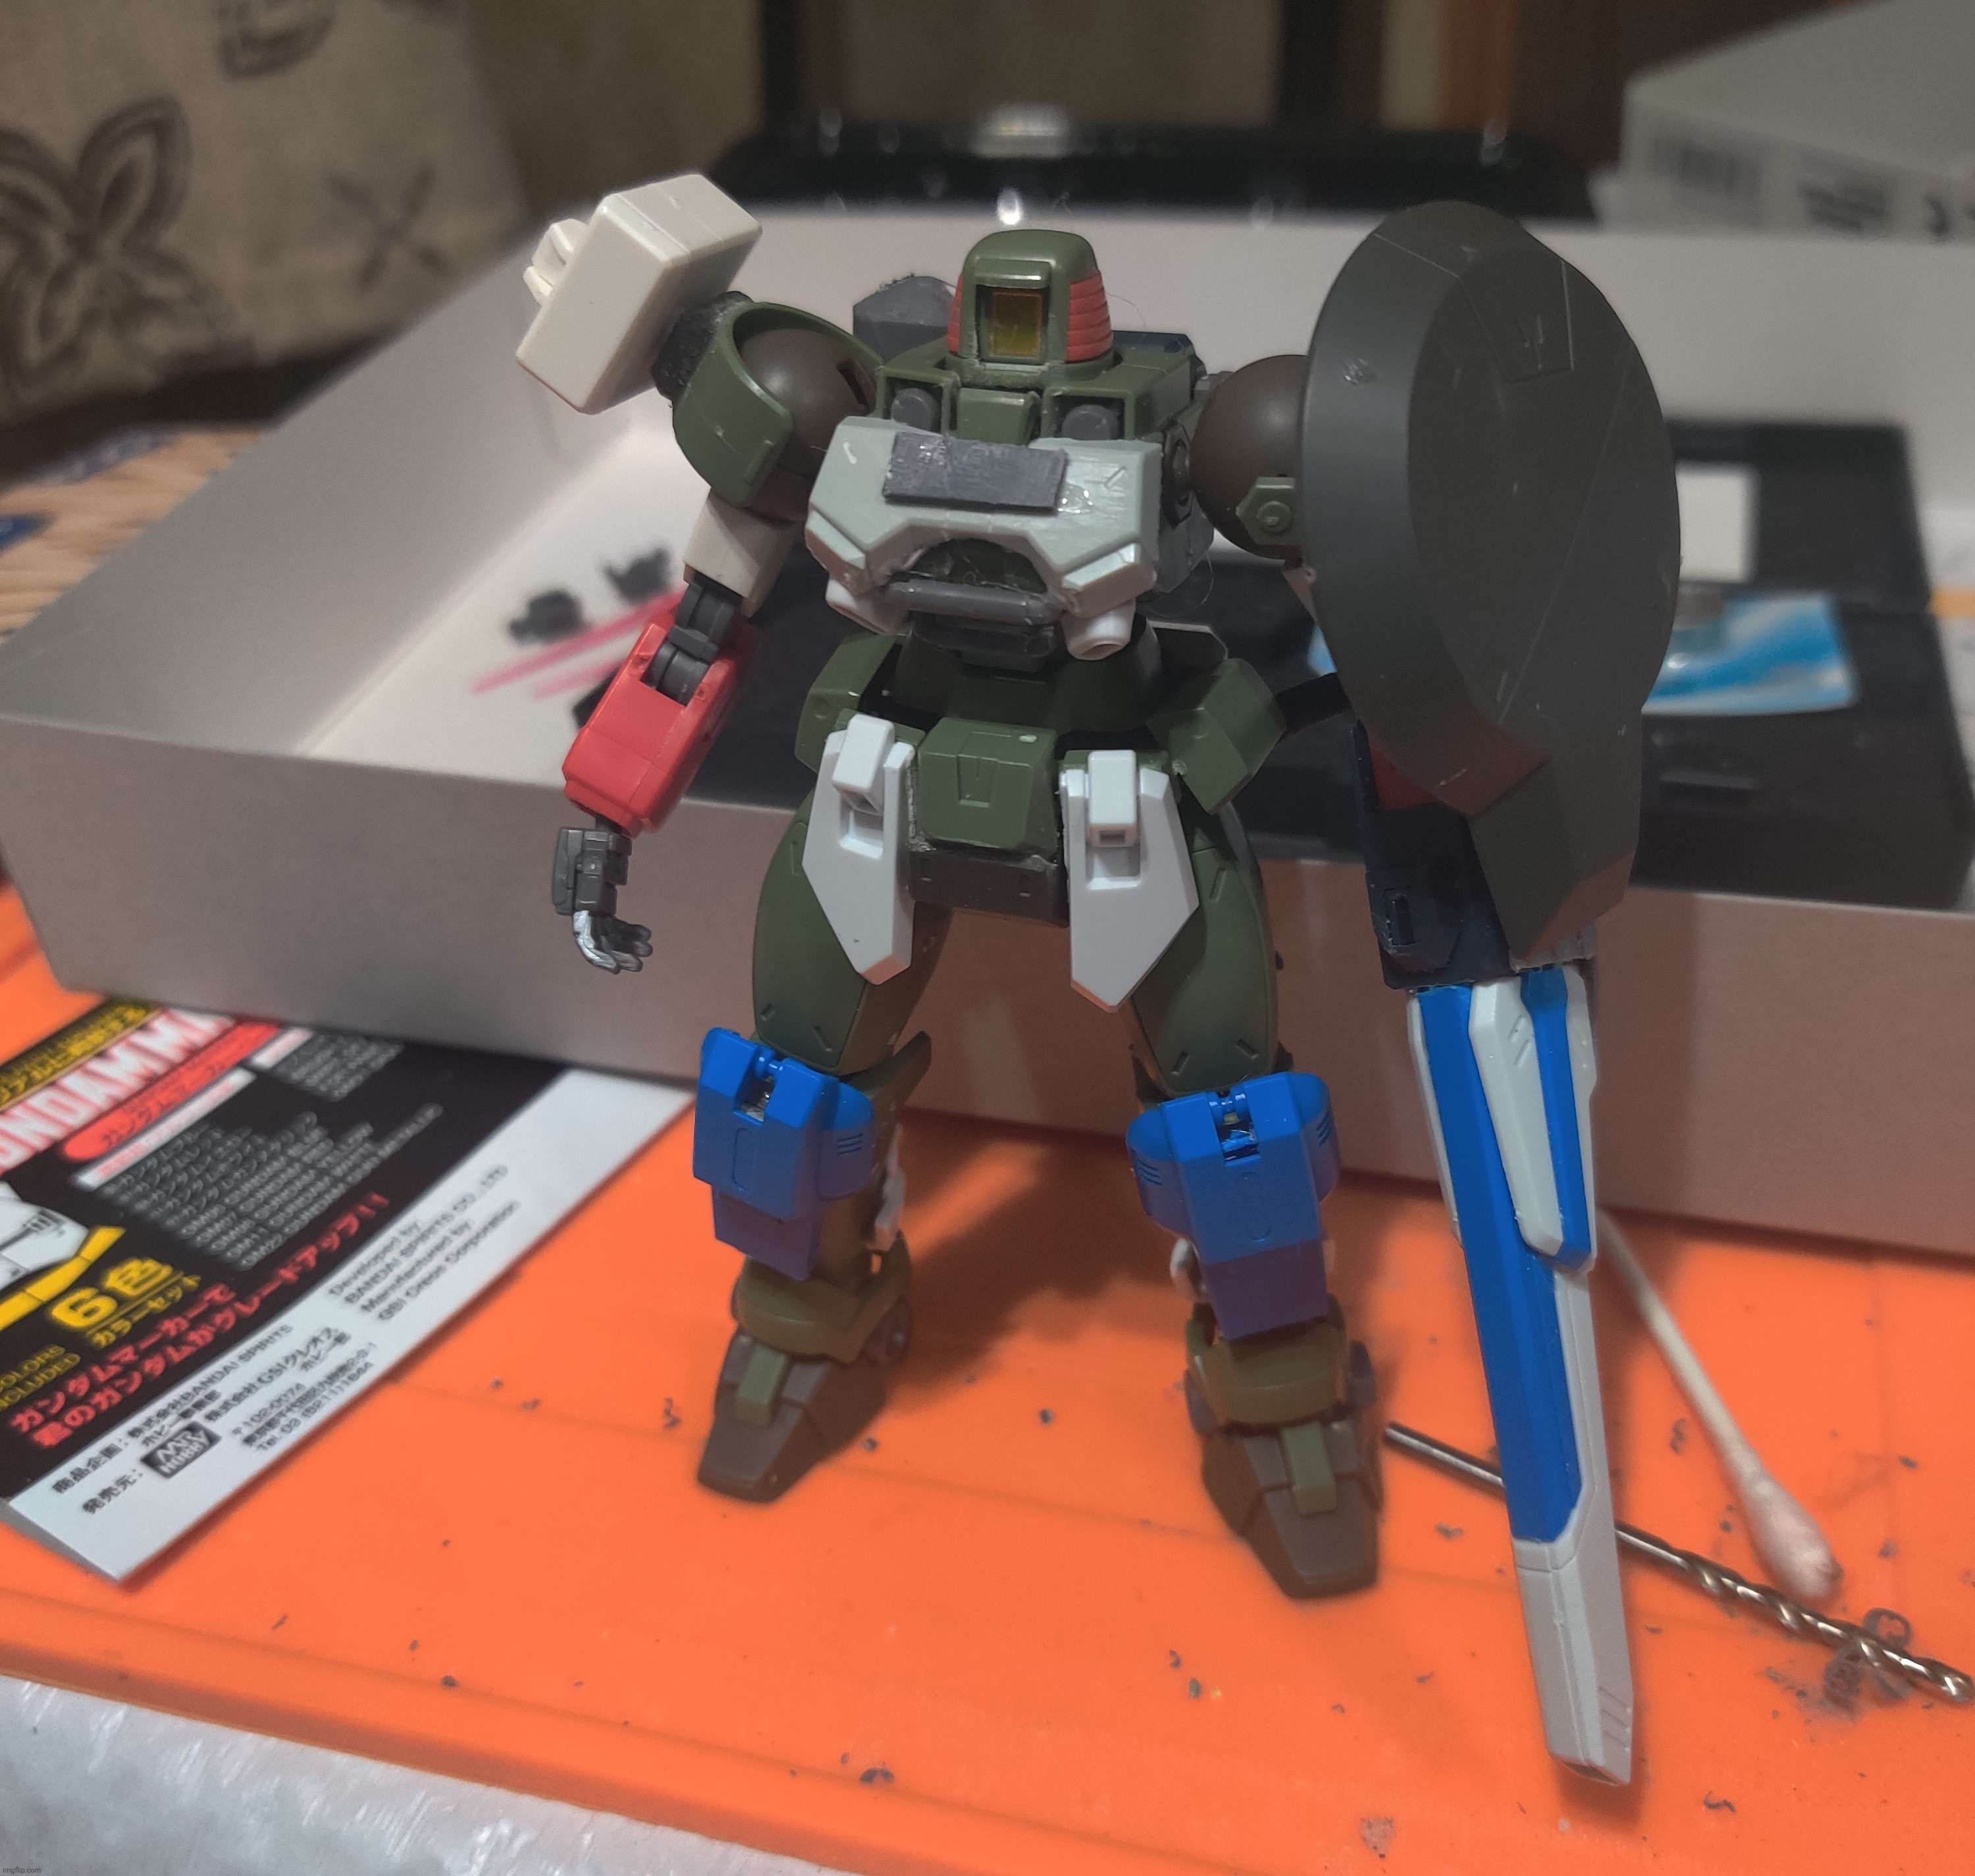 Almost forgot to fix the leg joints but now I've done it right and re-assembled it so y'all can see it before painting | made w/ Imgflip meme maker